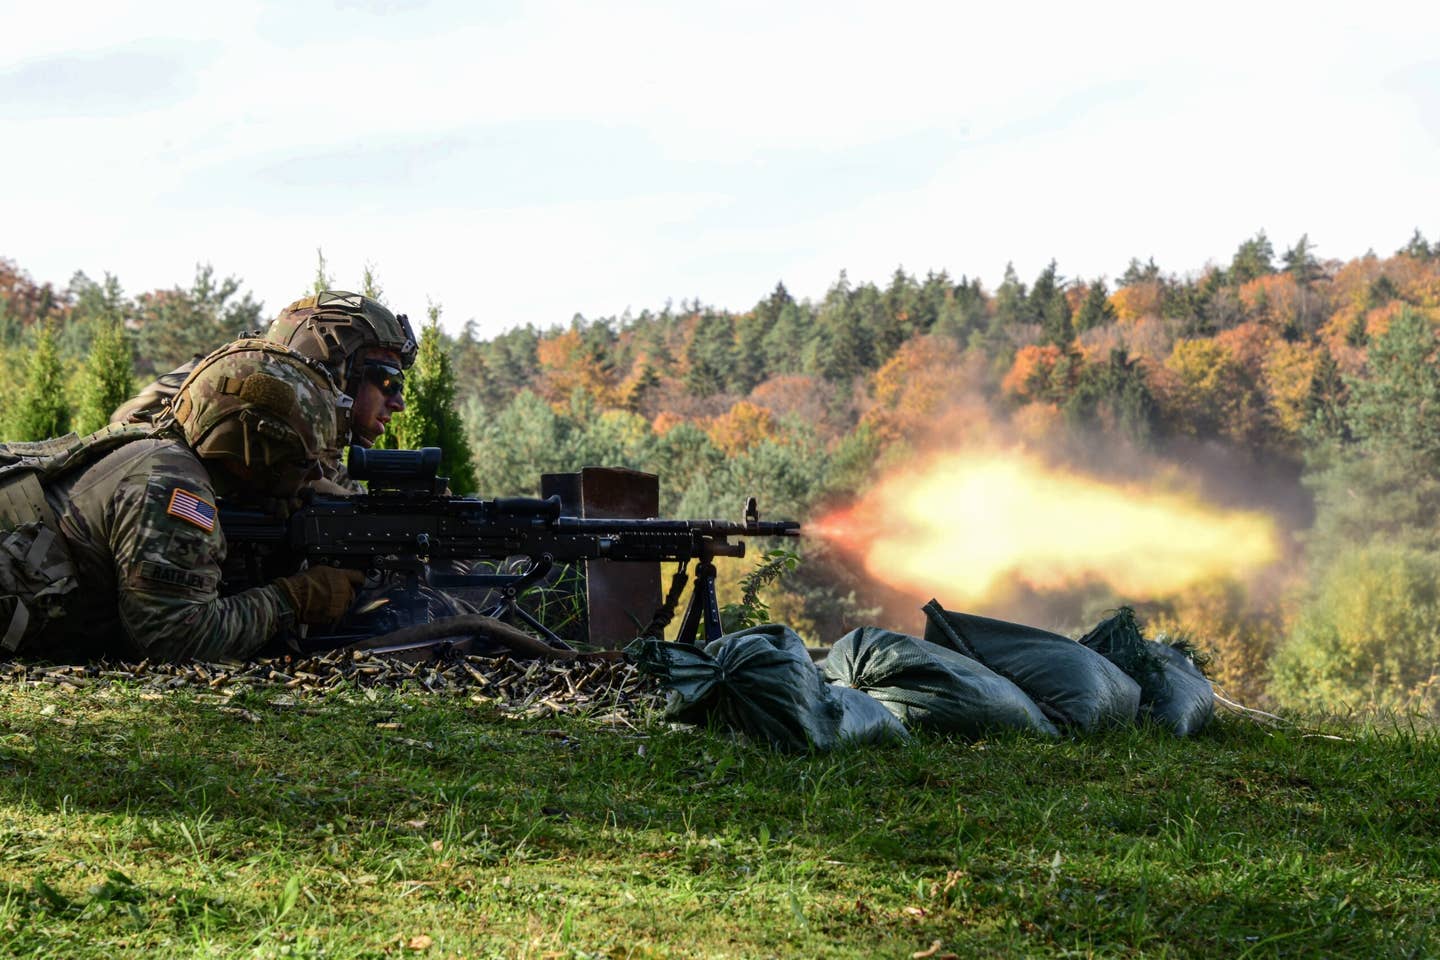 Live fire exercise at the 7th Army Training Command range in Grafenwoehr, Germany, where expanded training for Ukrainian troops will take place. (U.S. Army photo by Spc. Ryan Parr)